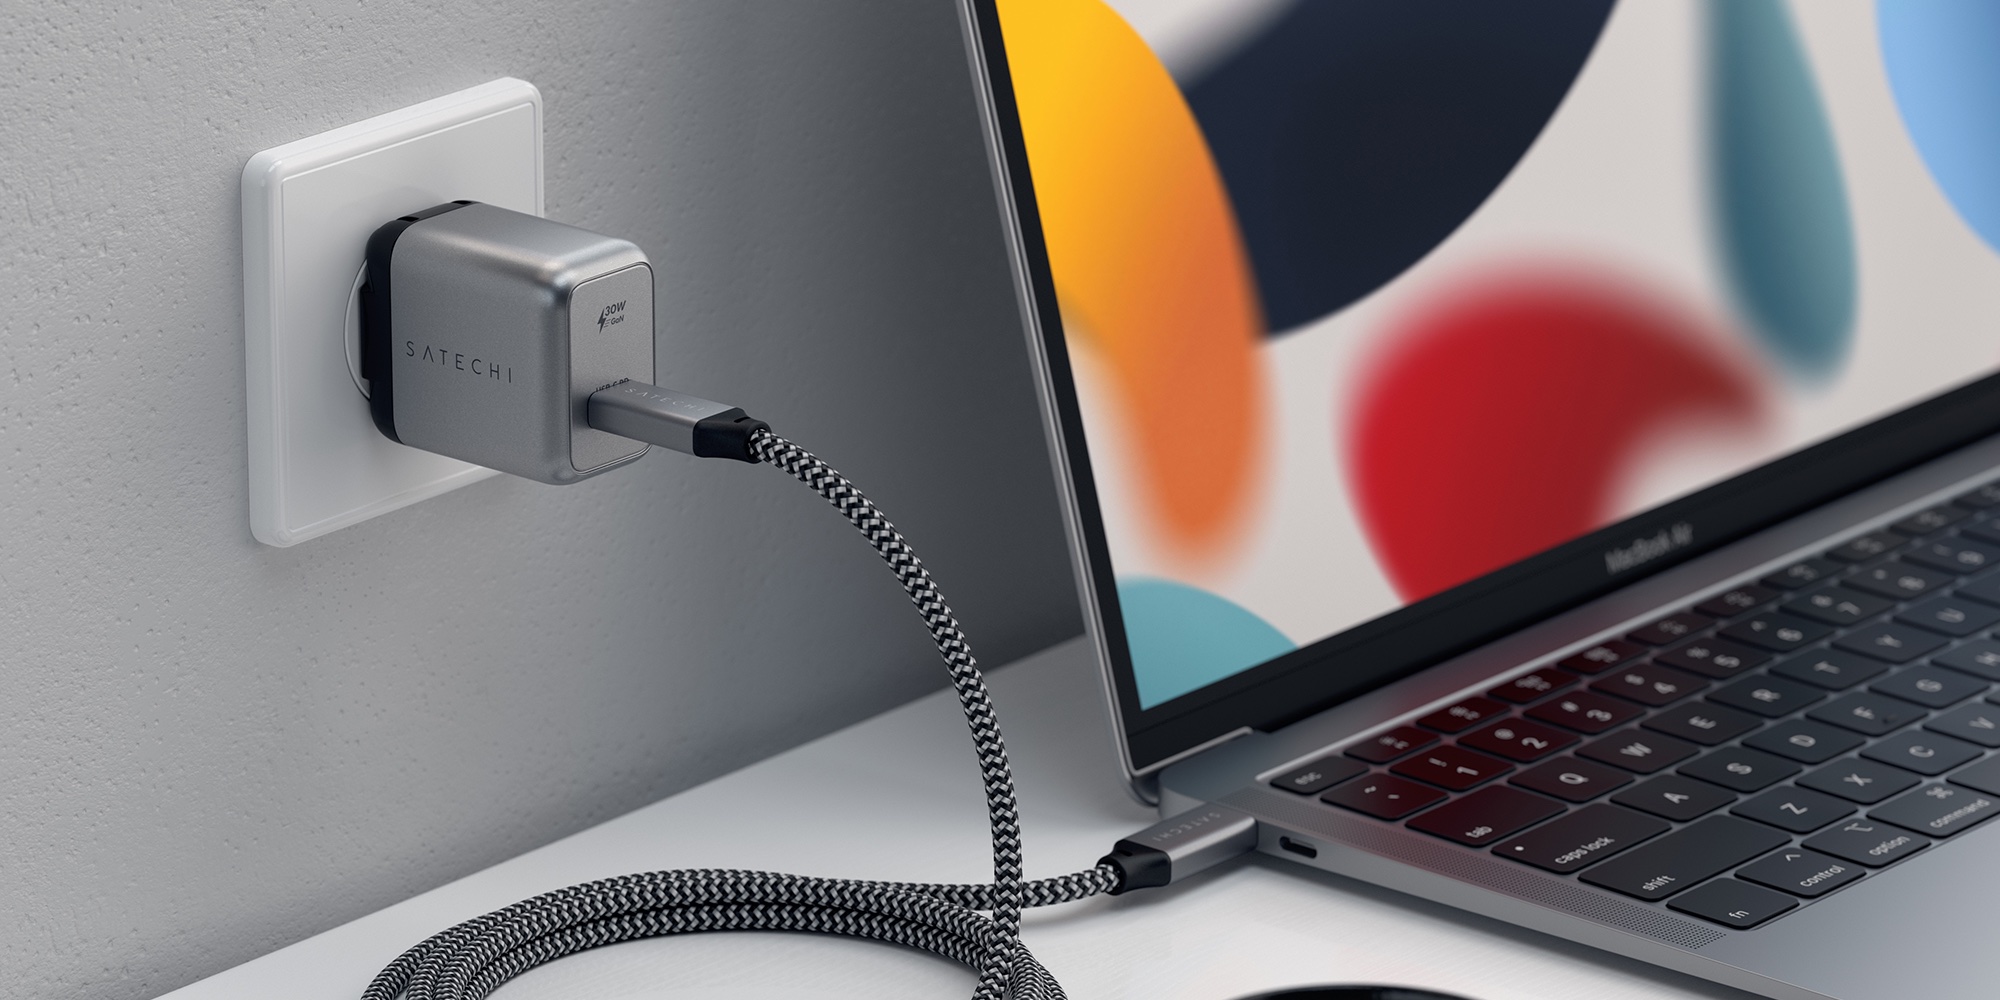 Satechi 30W USB-C GaN charger debuts with new cables - 9to5Toys